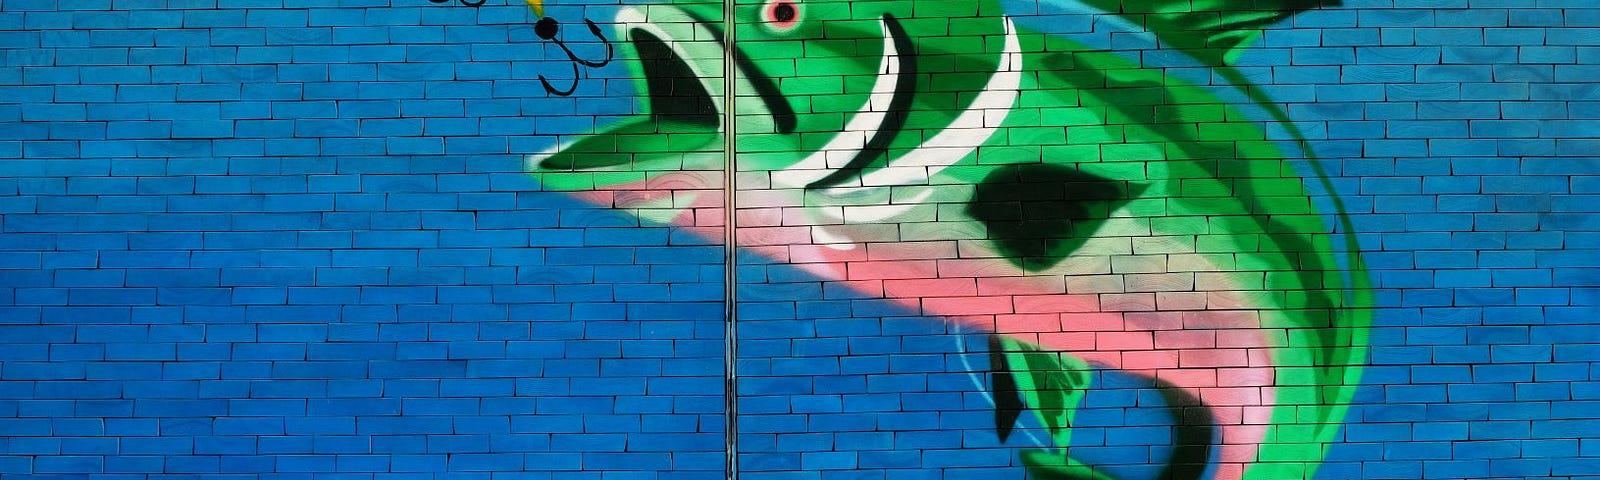 A mural showing a large green fish about to swallow a fishing hook.